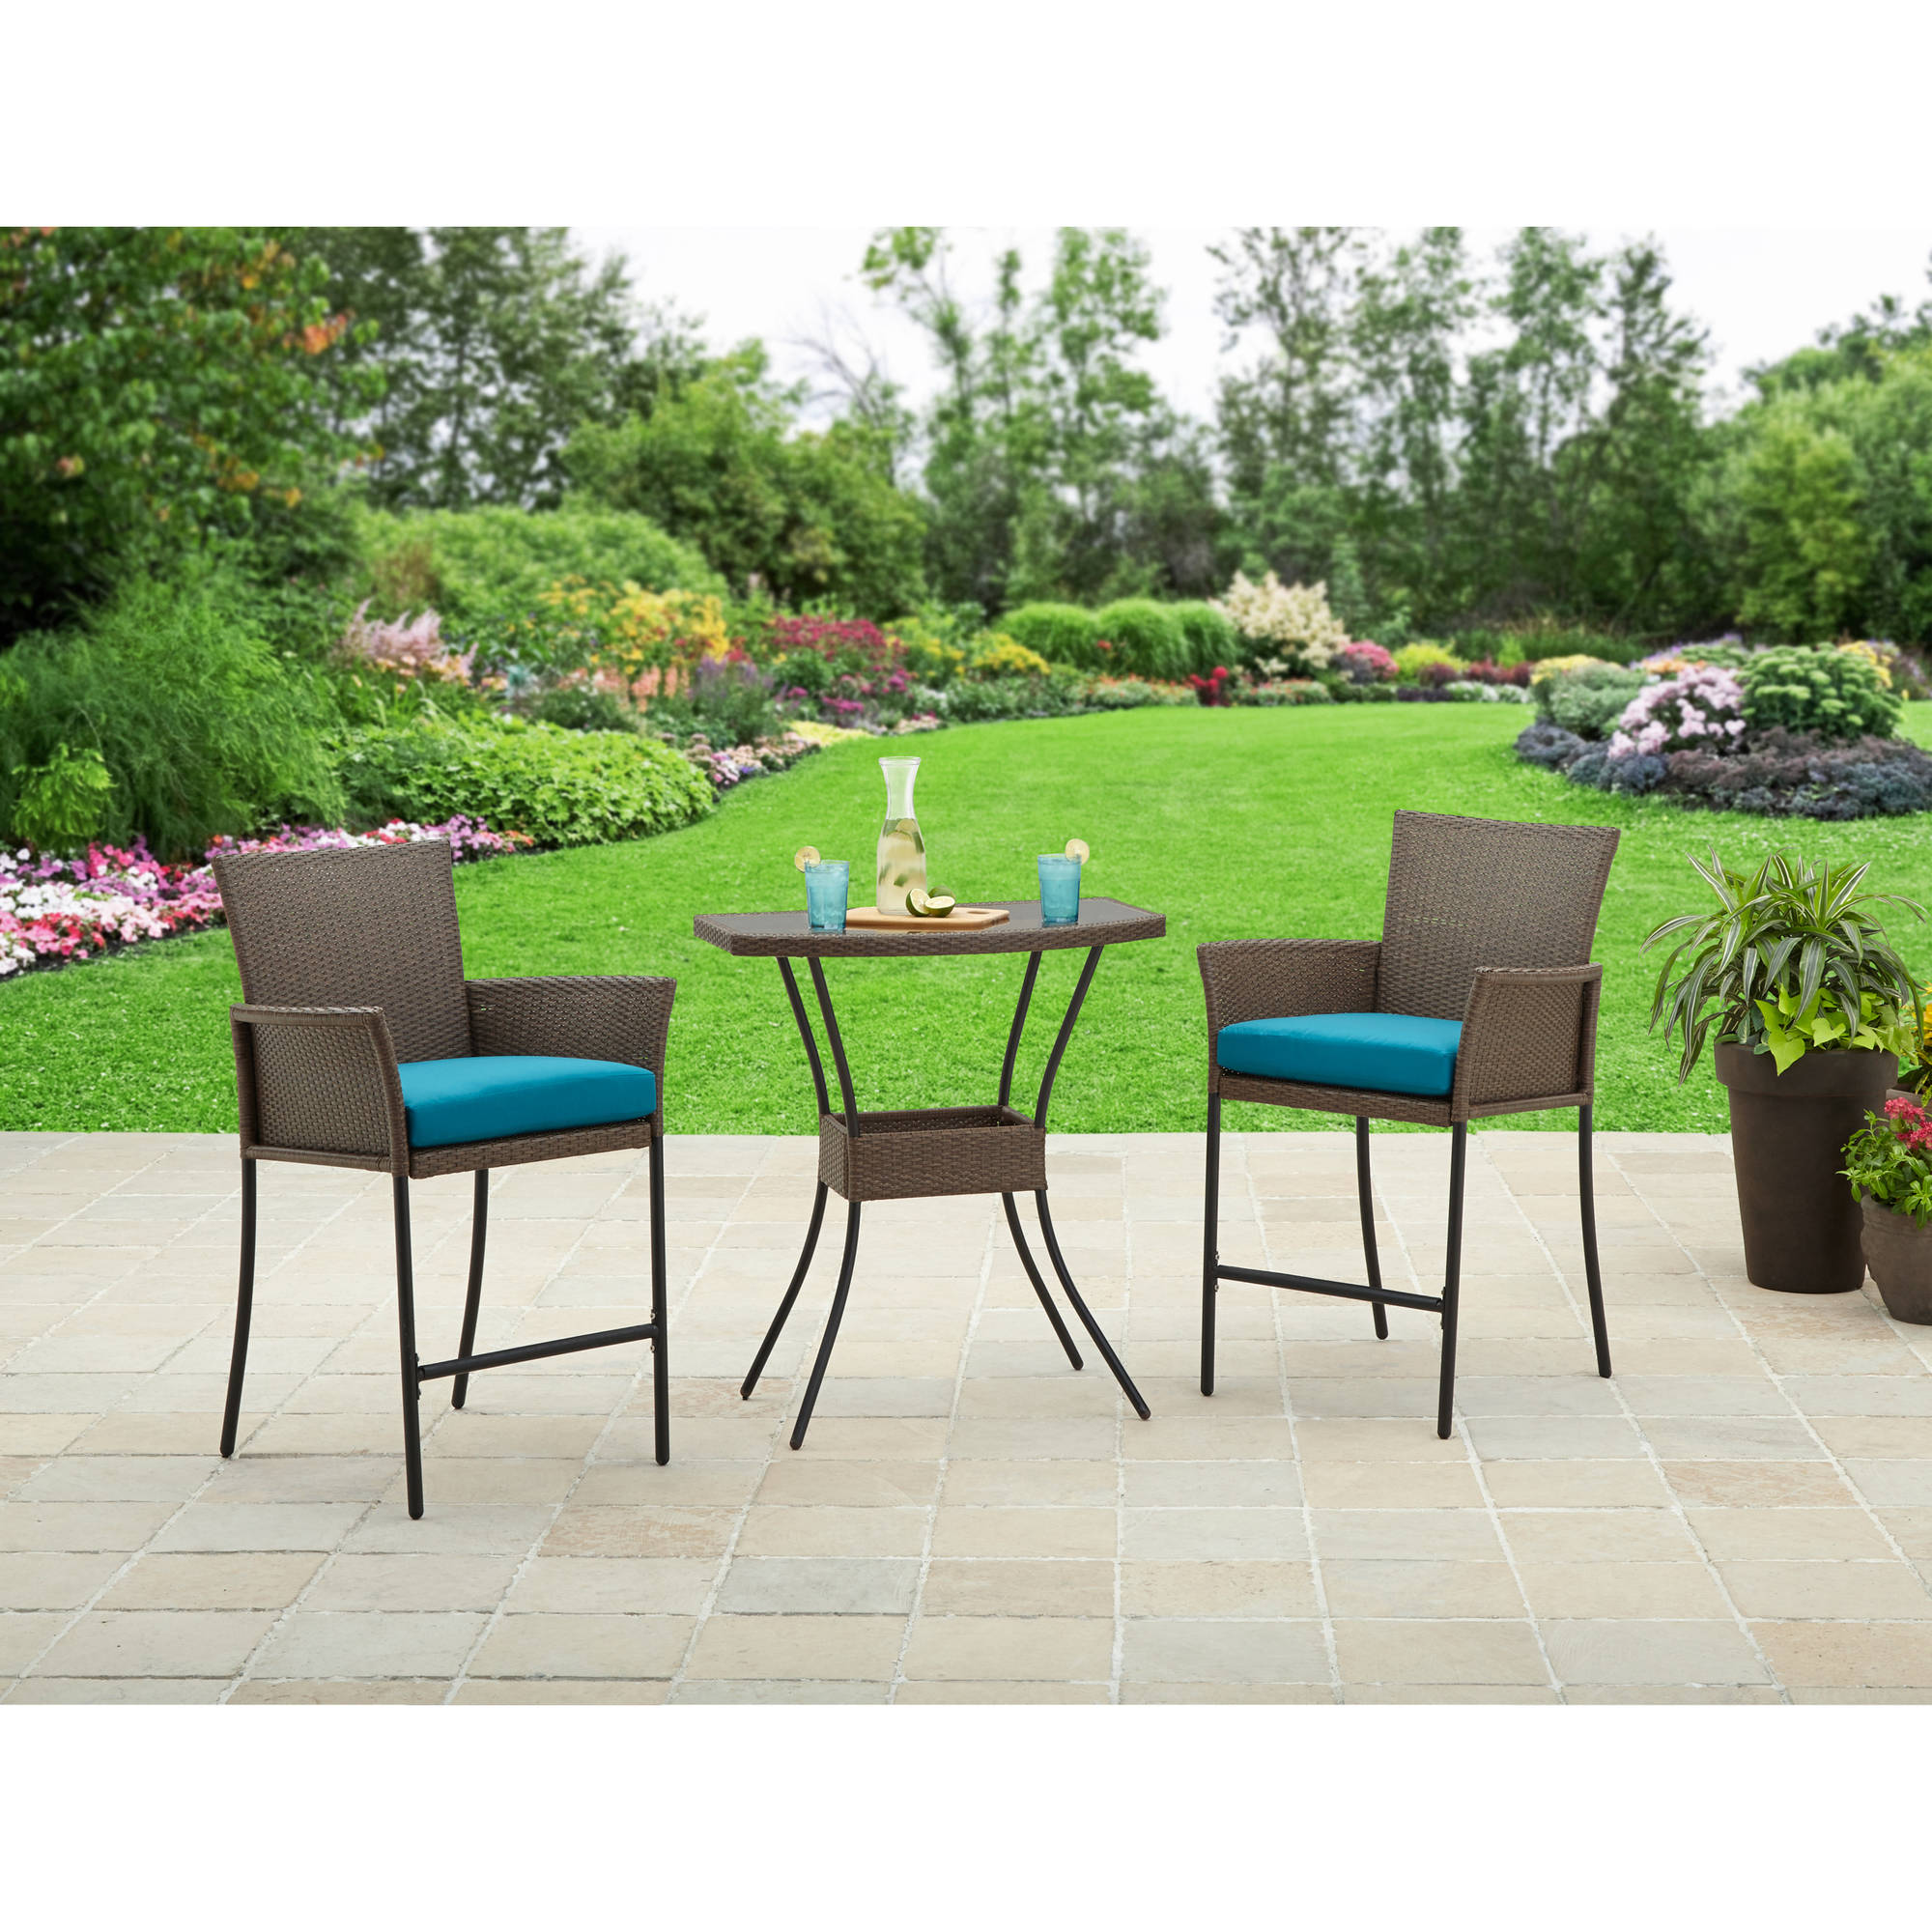 Price drop! Better Homes and Gardens Fairfield Bay 3-piece balcony bistro set for $125